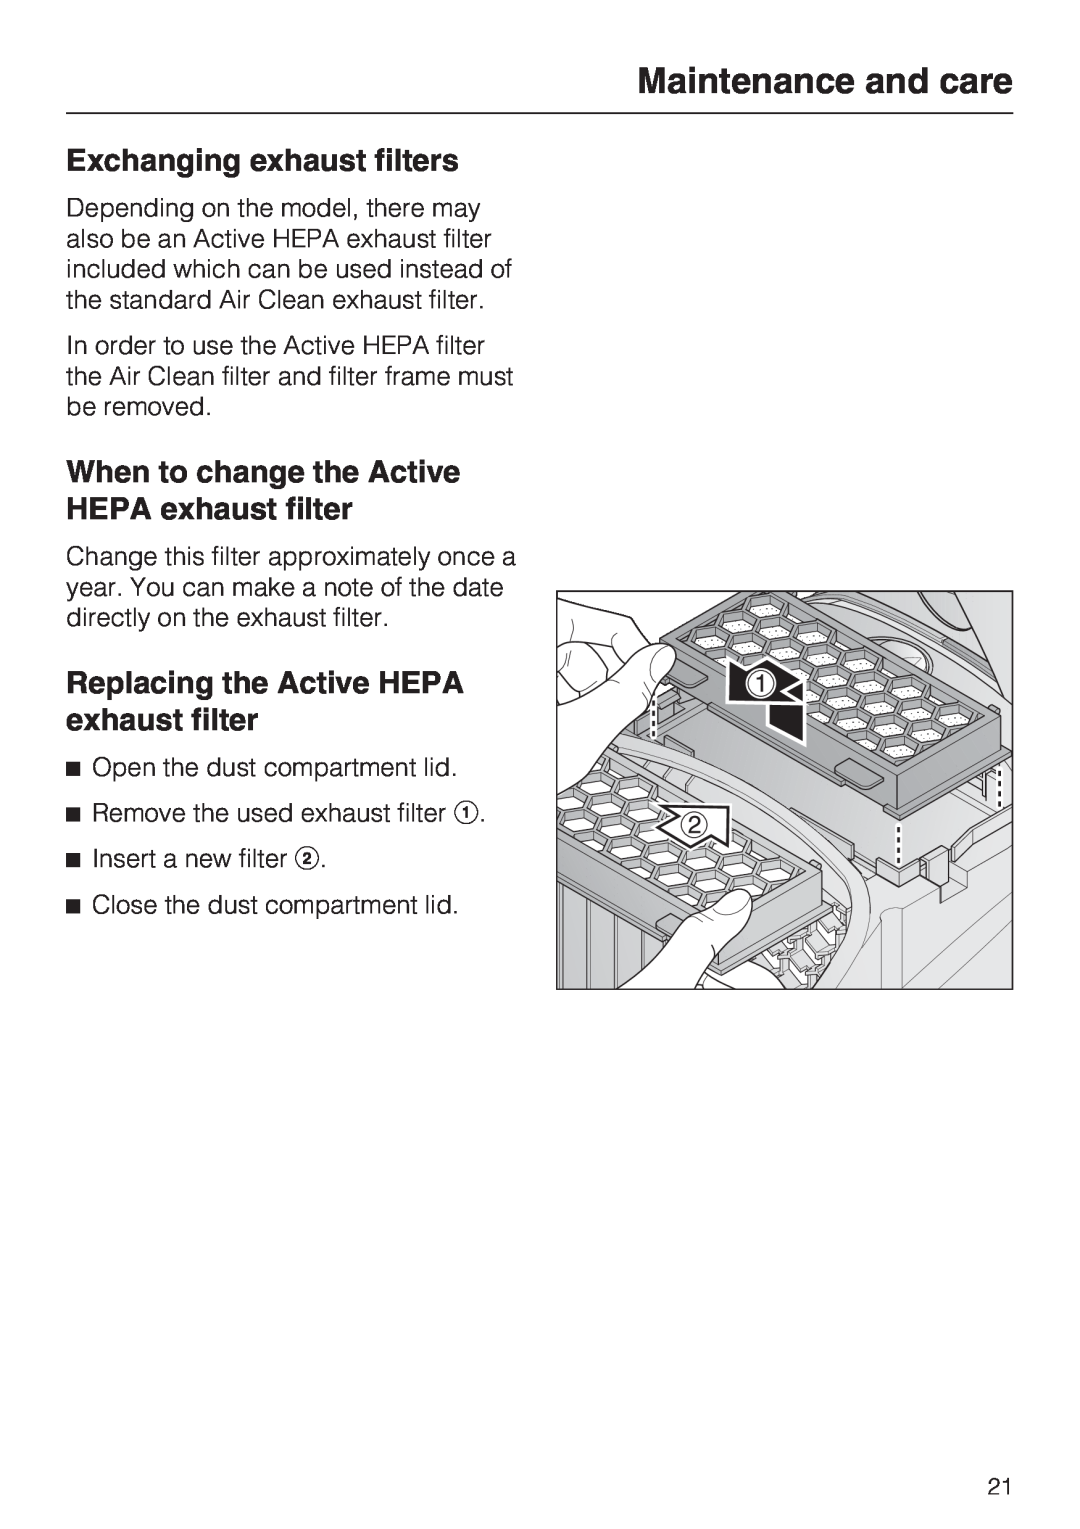 Miele S 2000 Exchanging exhaust filters, When to change the Active HEPA exhaust filter, Maintenance and care 